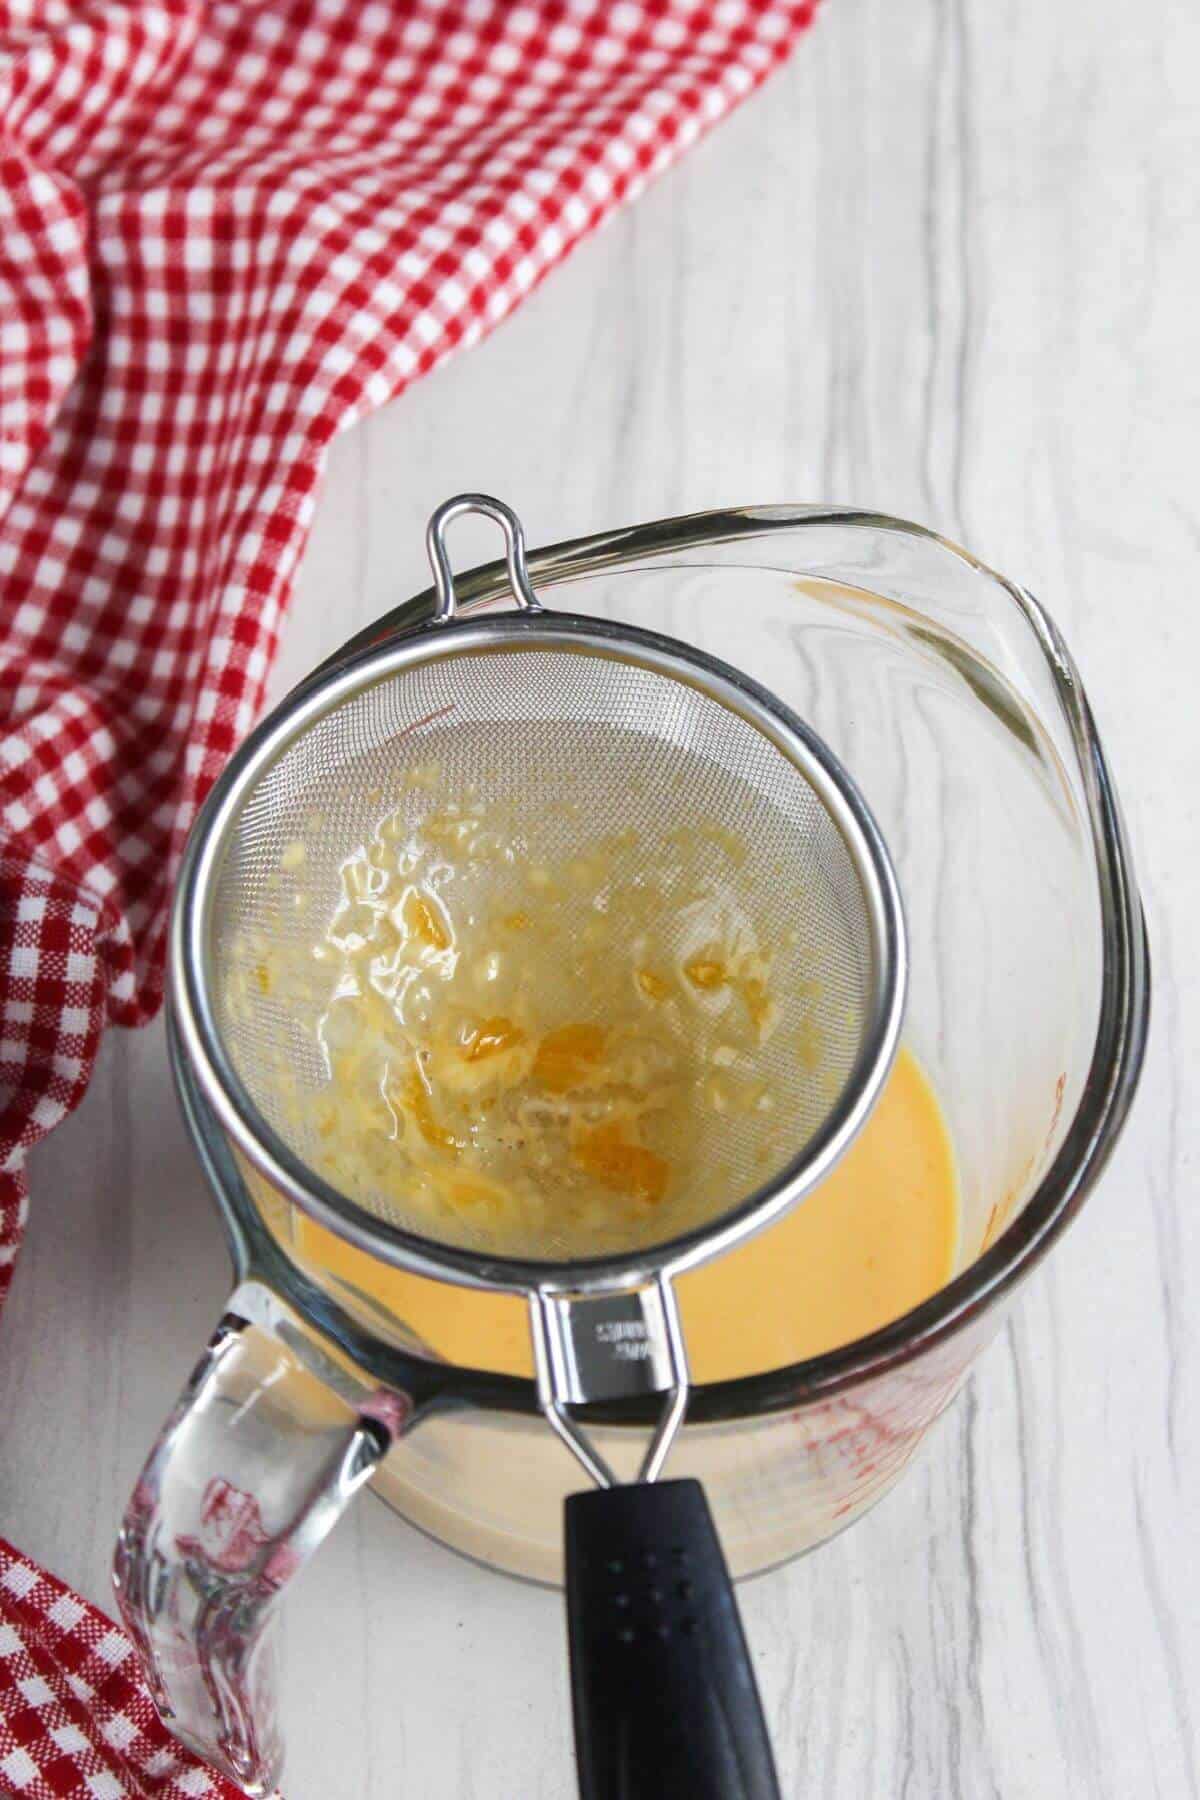 A glass bowl with a strainer over it, used for straining egg yolk mixture for leche flan.